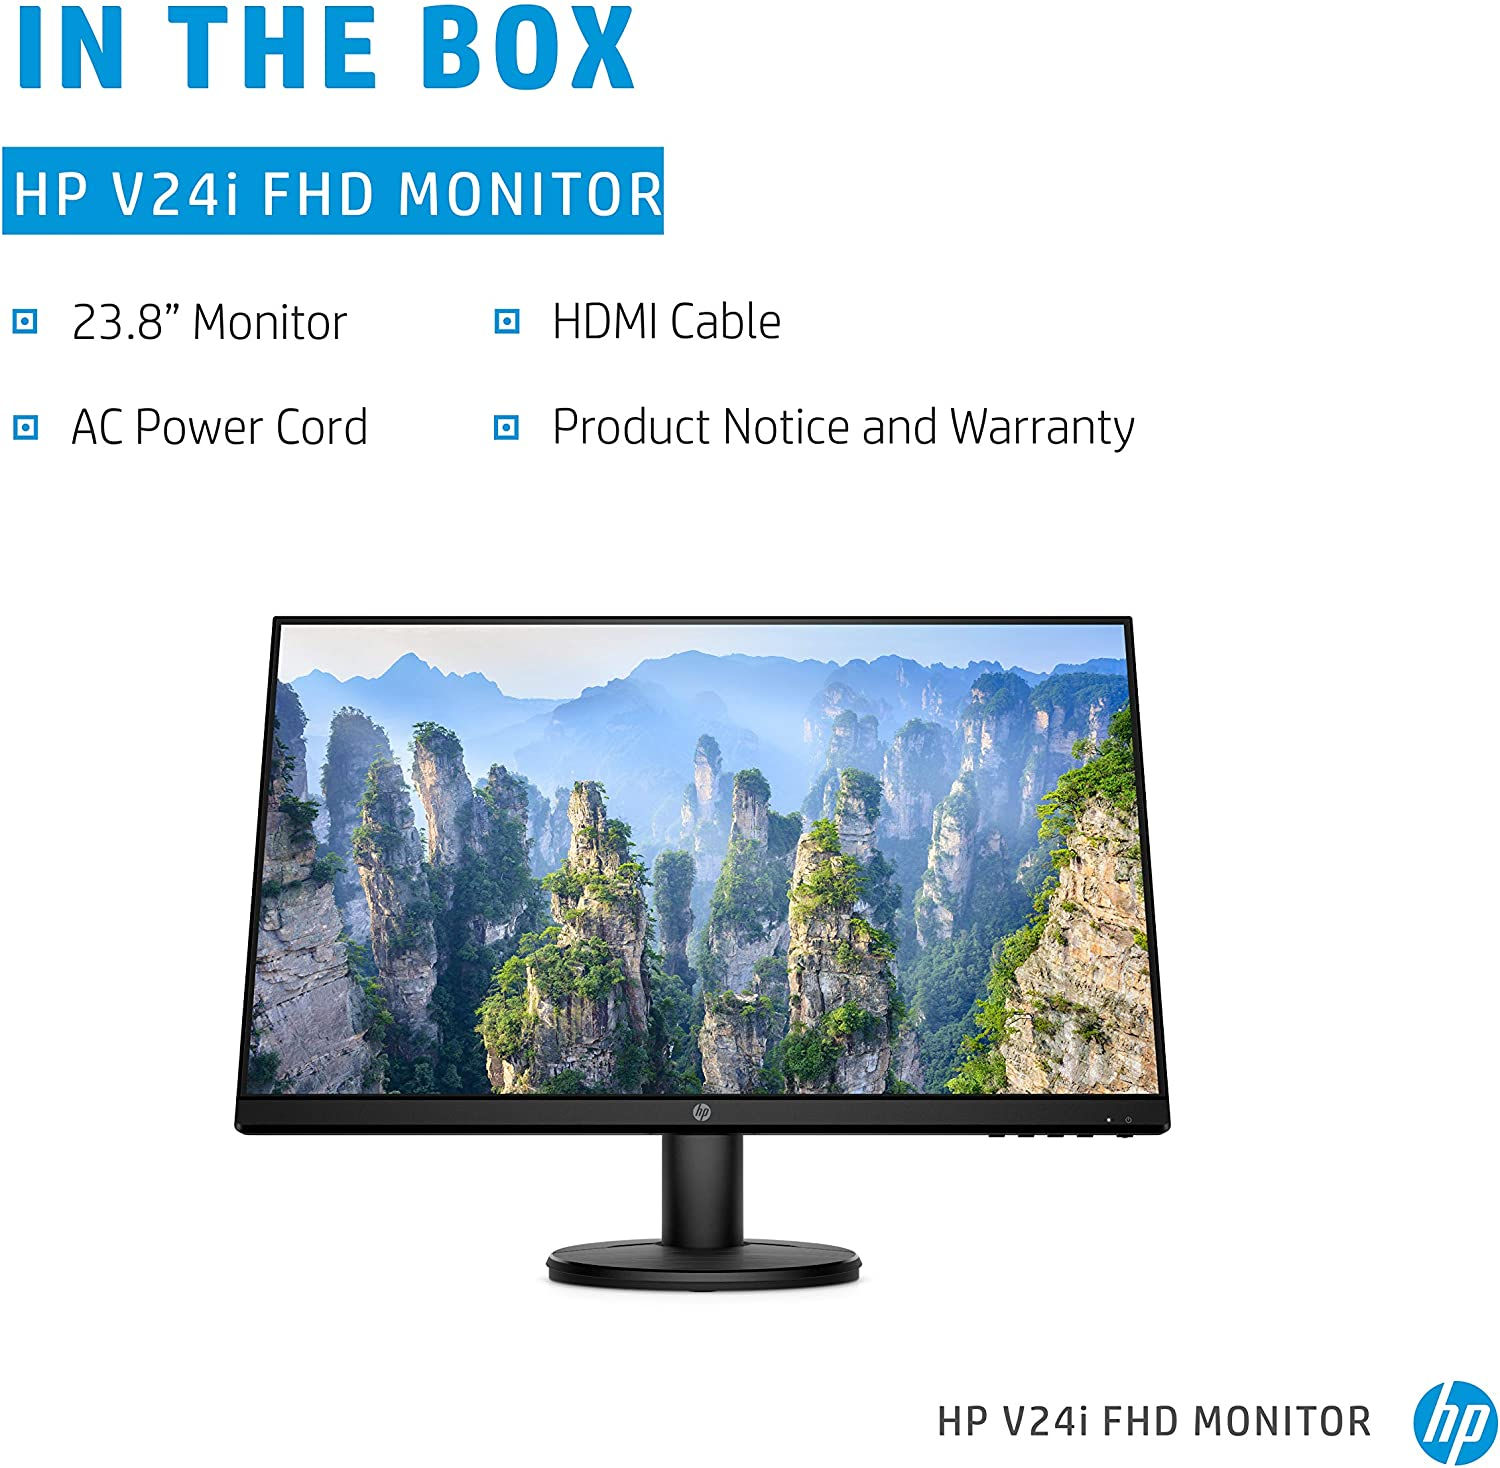 HP V24i FHD Monitor | 23.8-inch Diagonal Full HD Computer Monitor with IPS Panel and 3-Sided Micro Edge Design | Low Blue Light Screen with HDMI and VGA Ports | (9RV15AA#ABA)